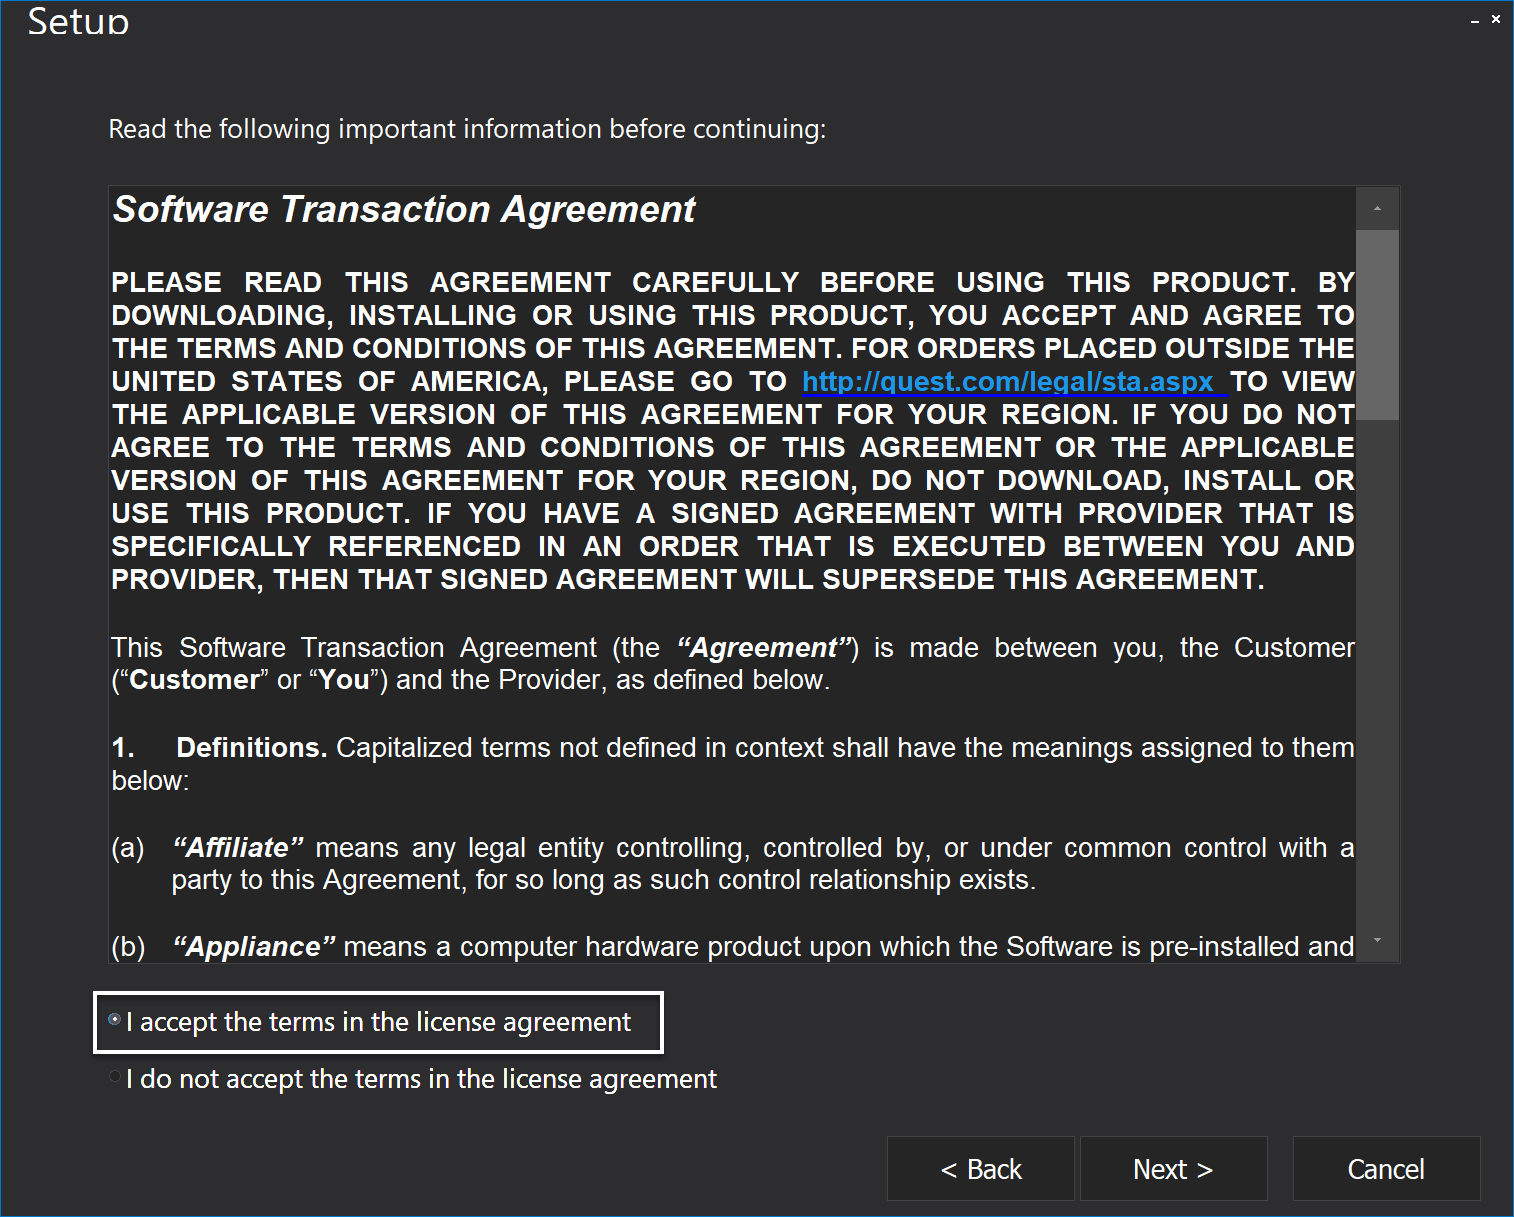 Software Transaction Agreement in the ApexSQL Pump installation wizard